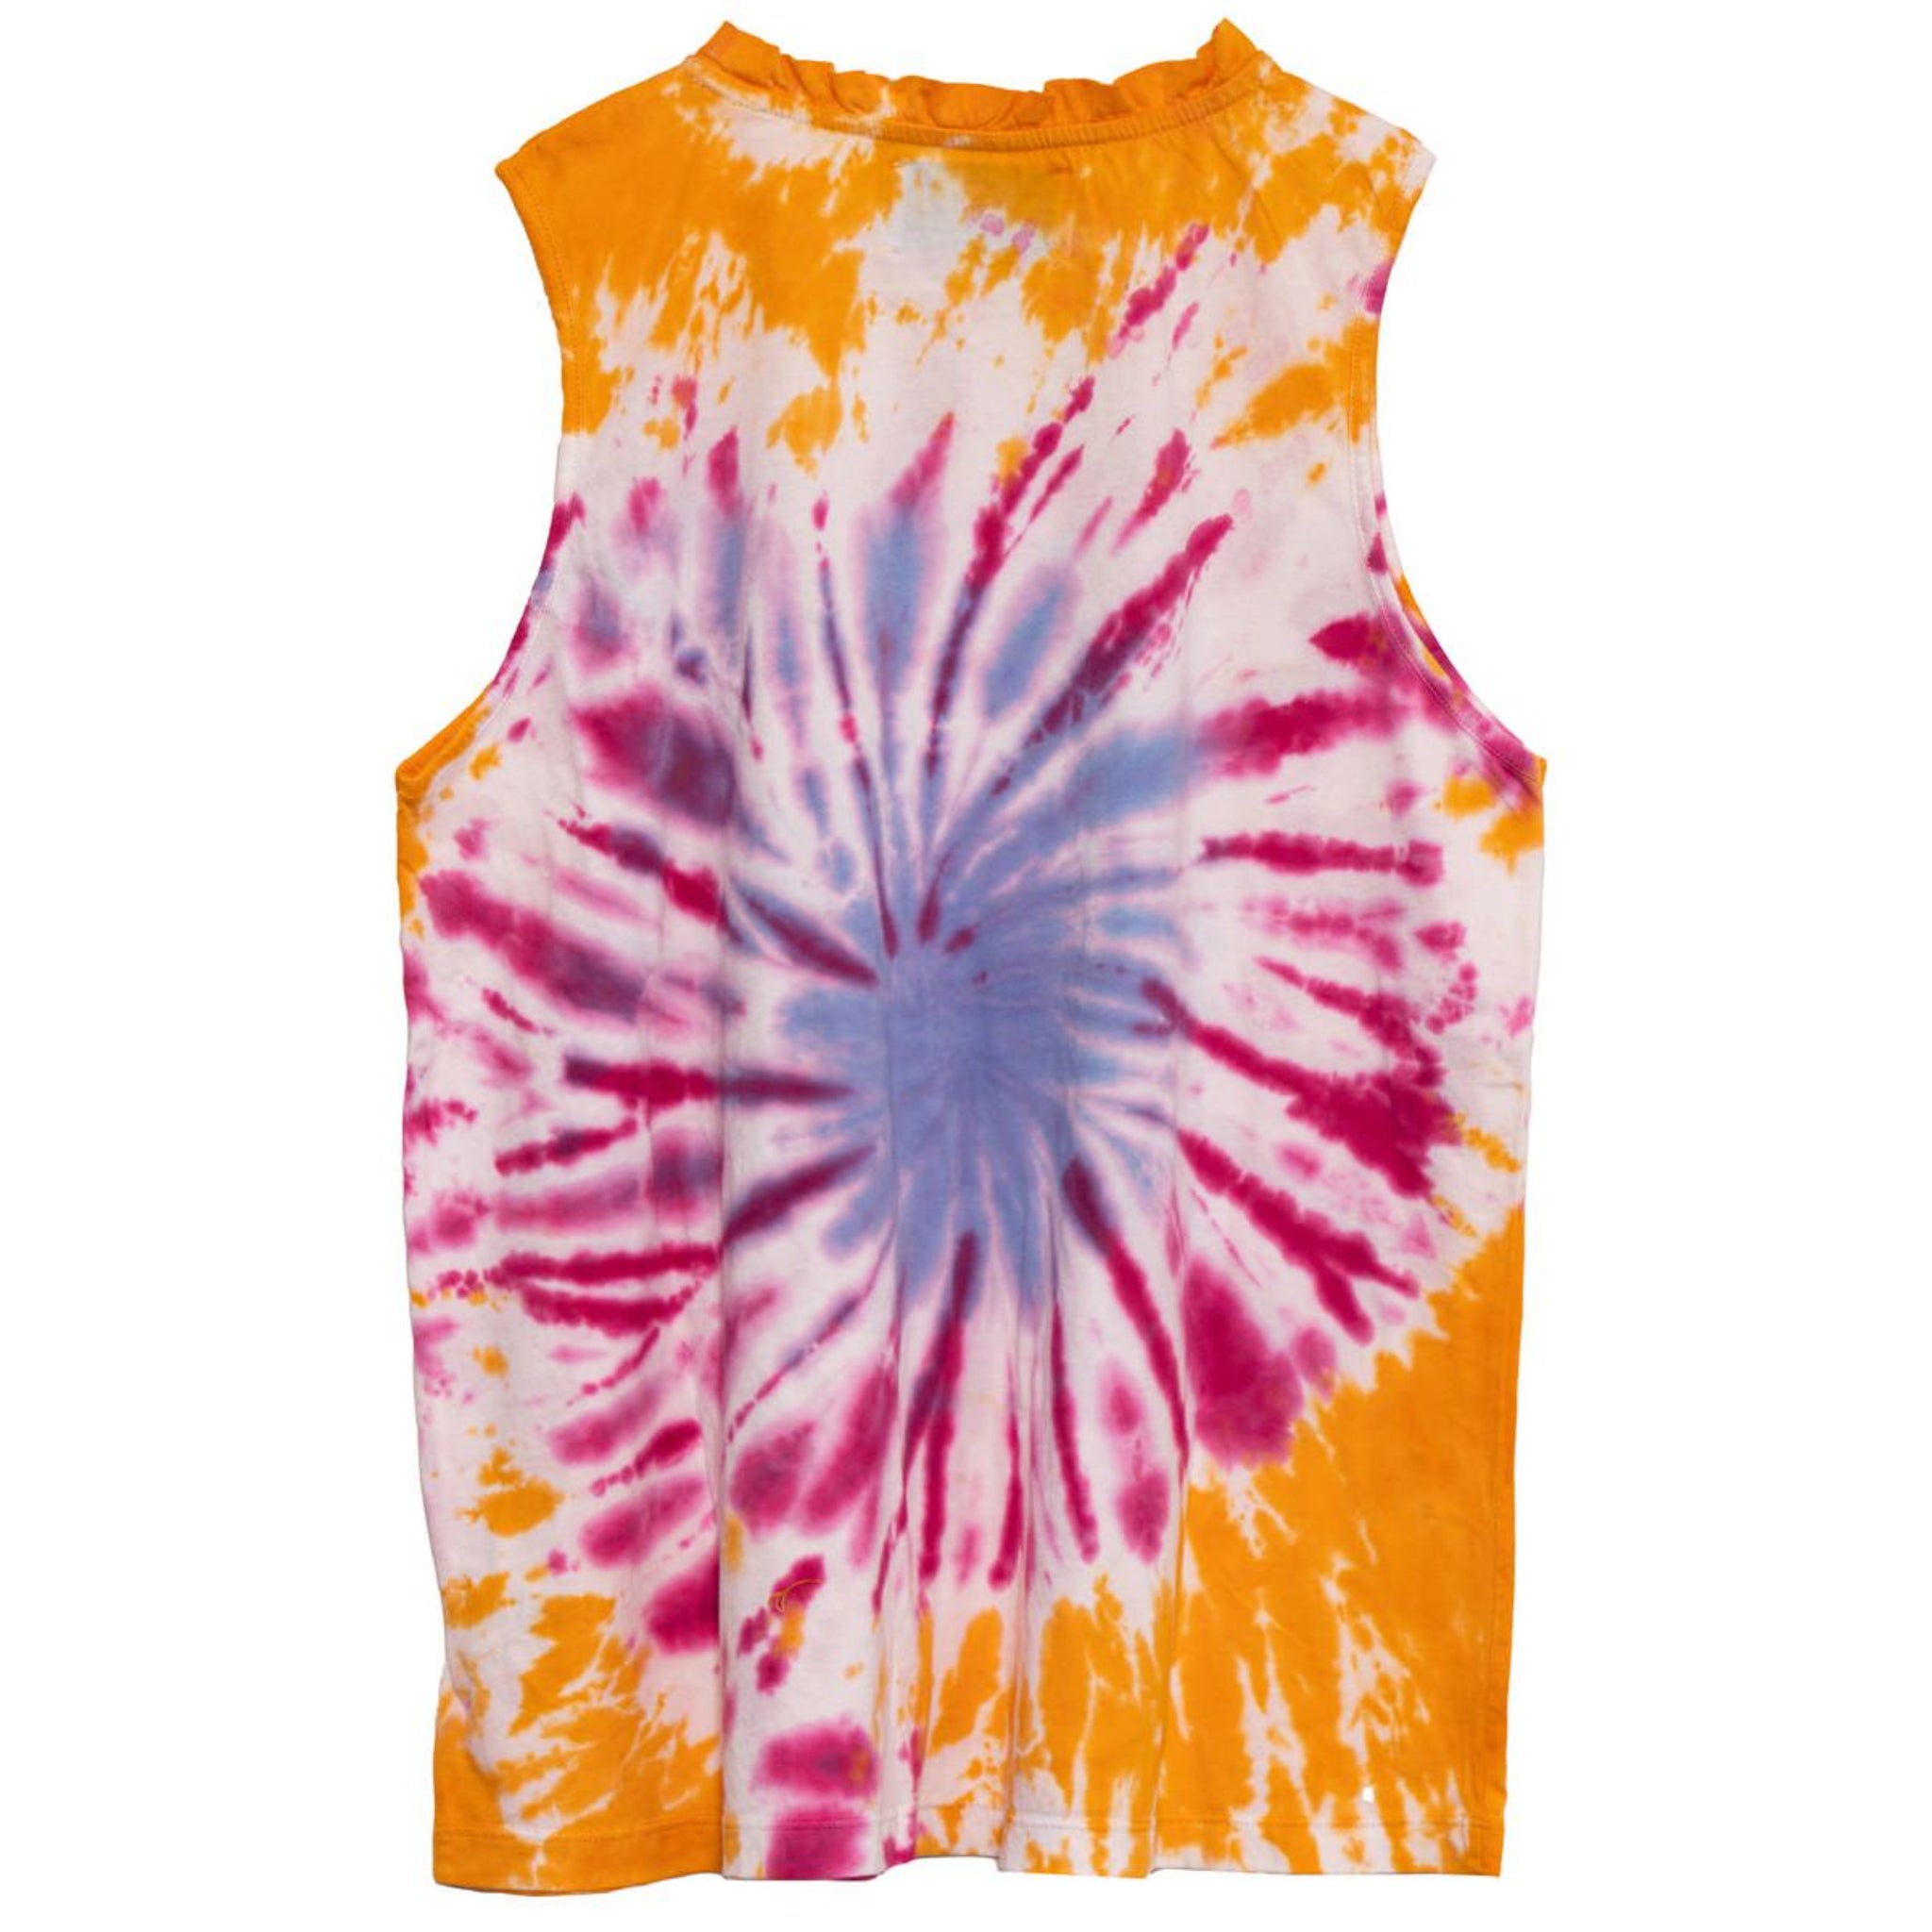 Another Brand Top "Tie Dye"